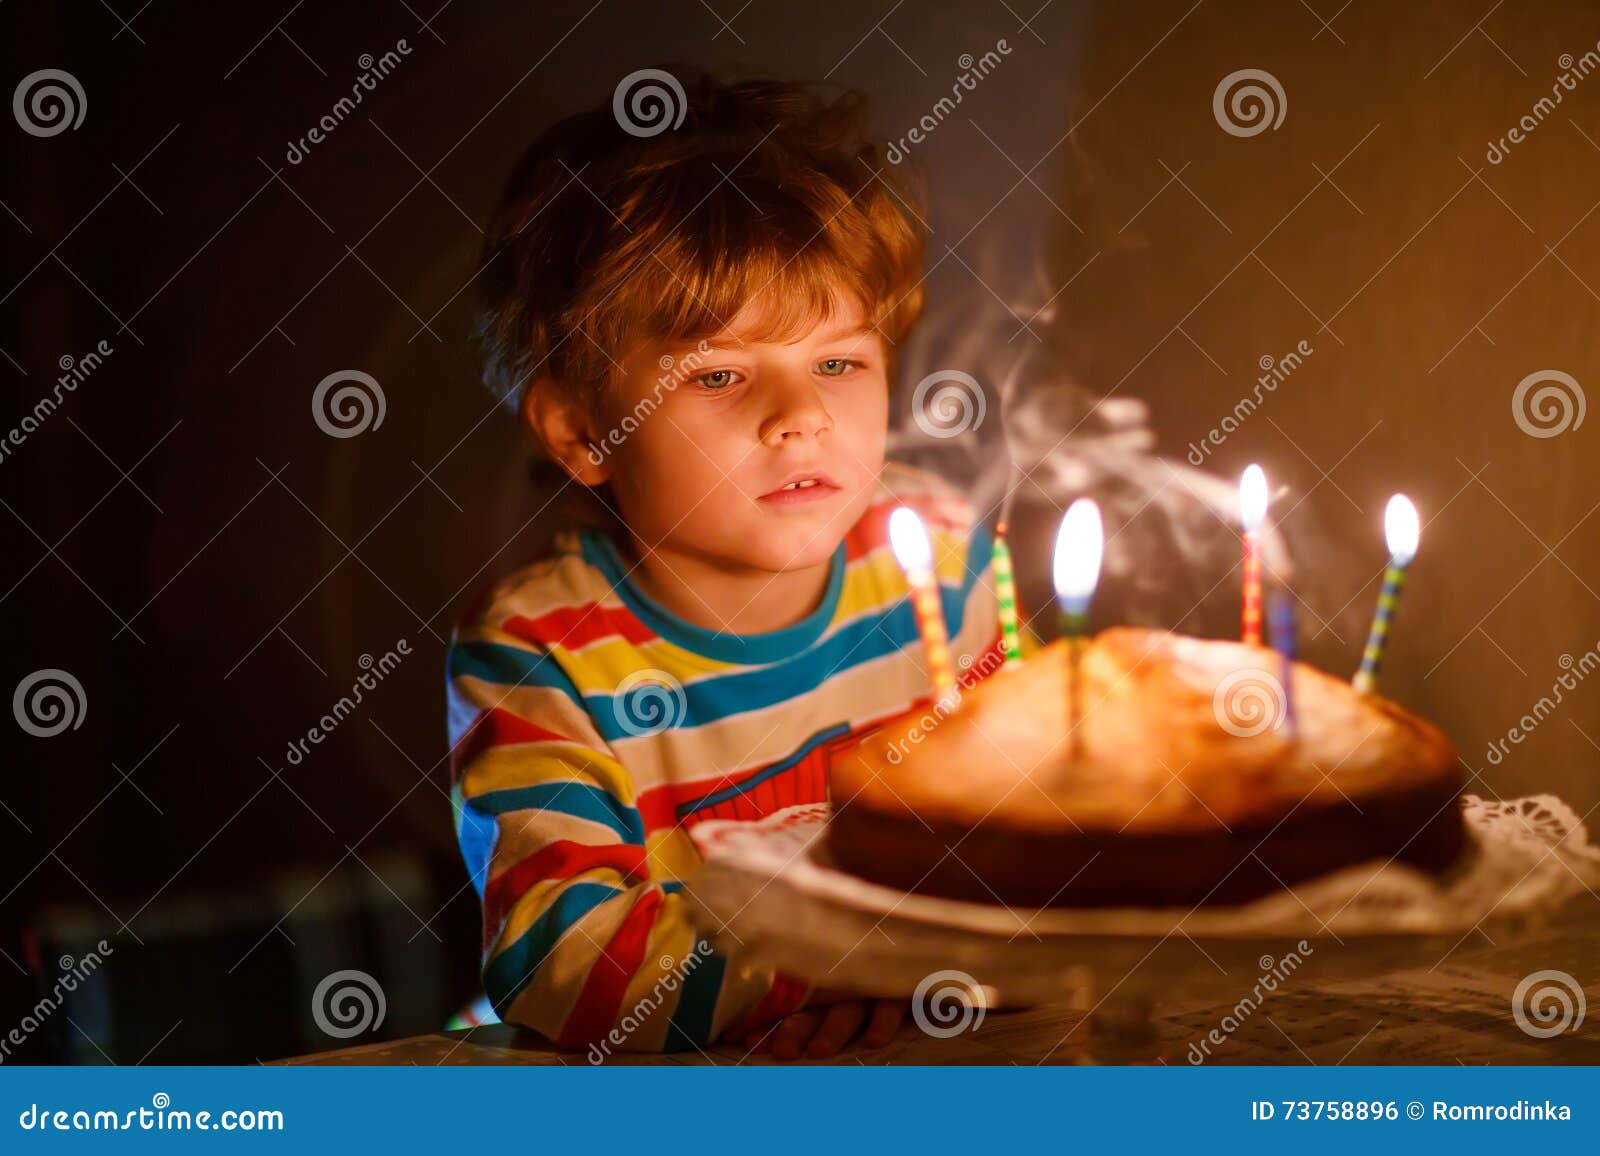 Little Kid Boy Blowing Candles on Birthday Cake Stock Photo - Image of ...